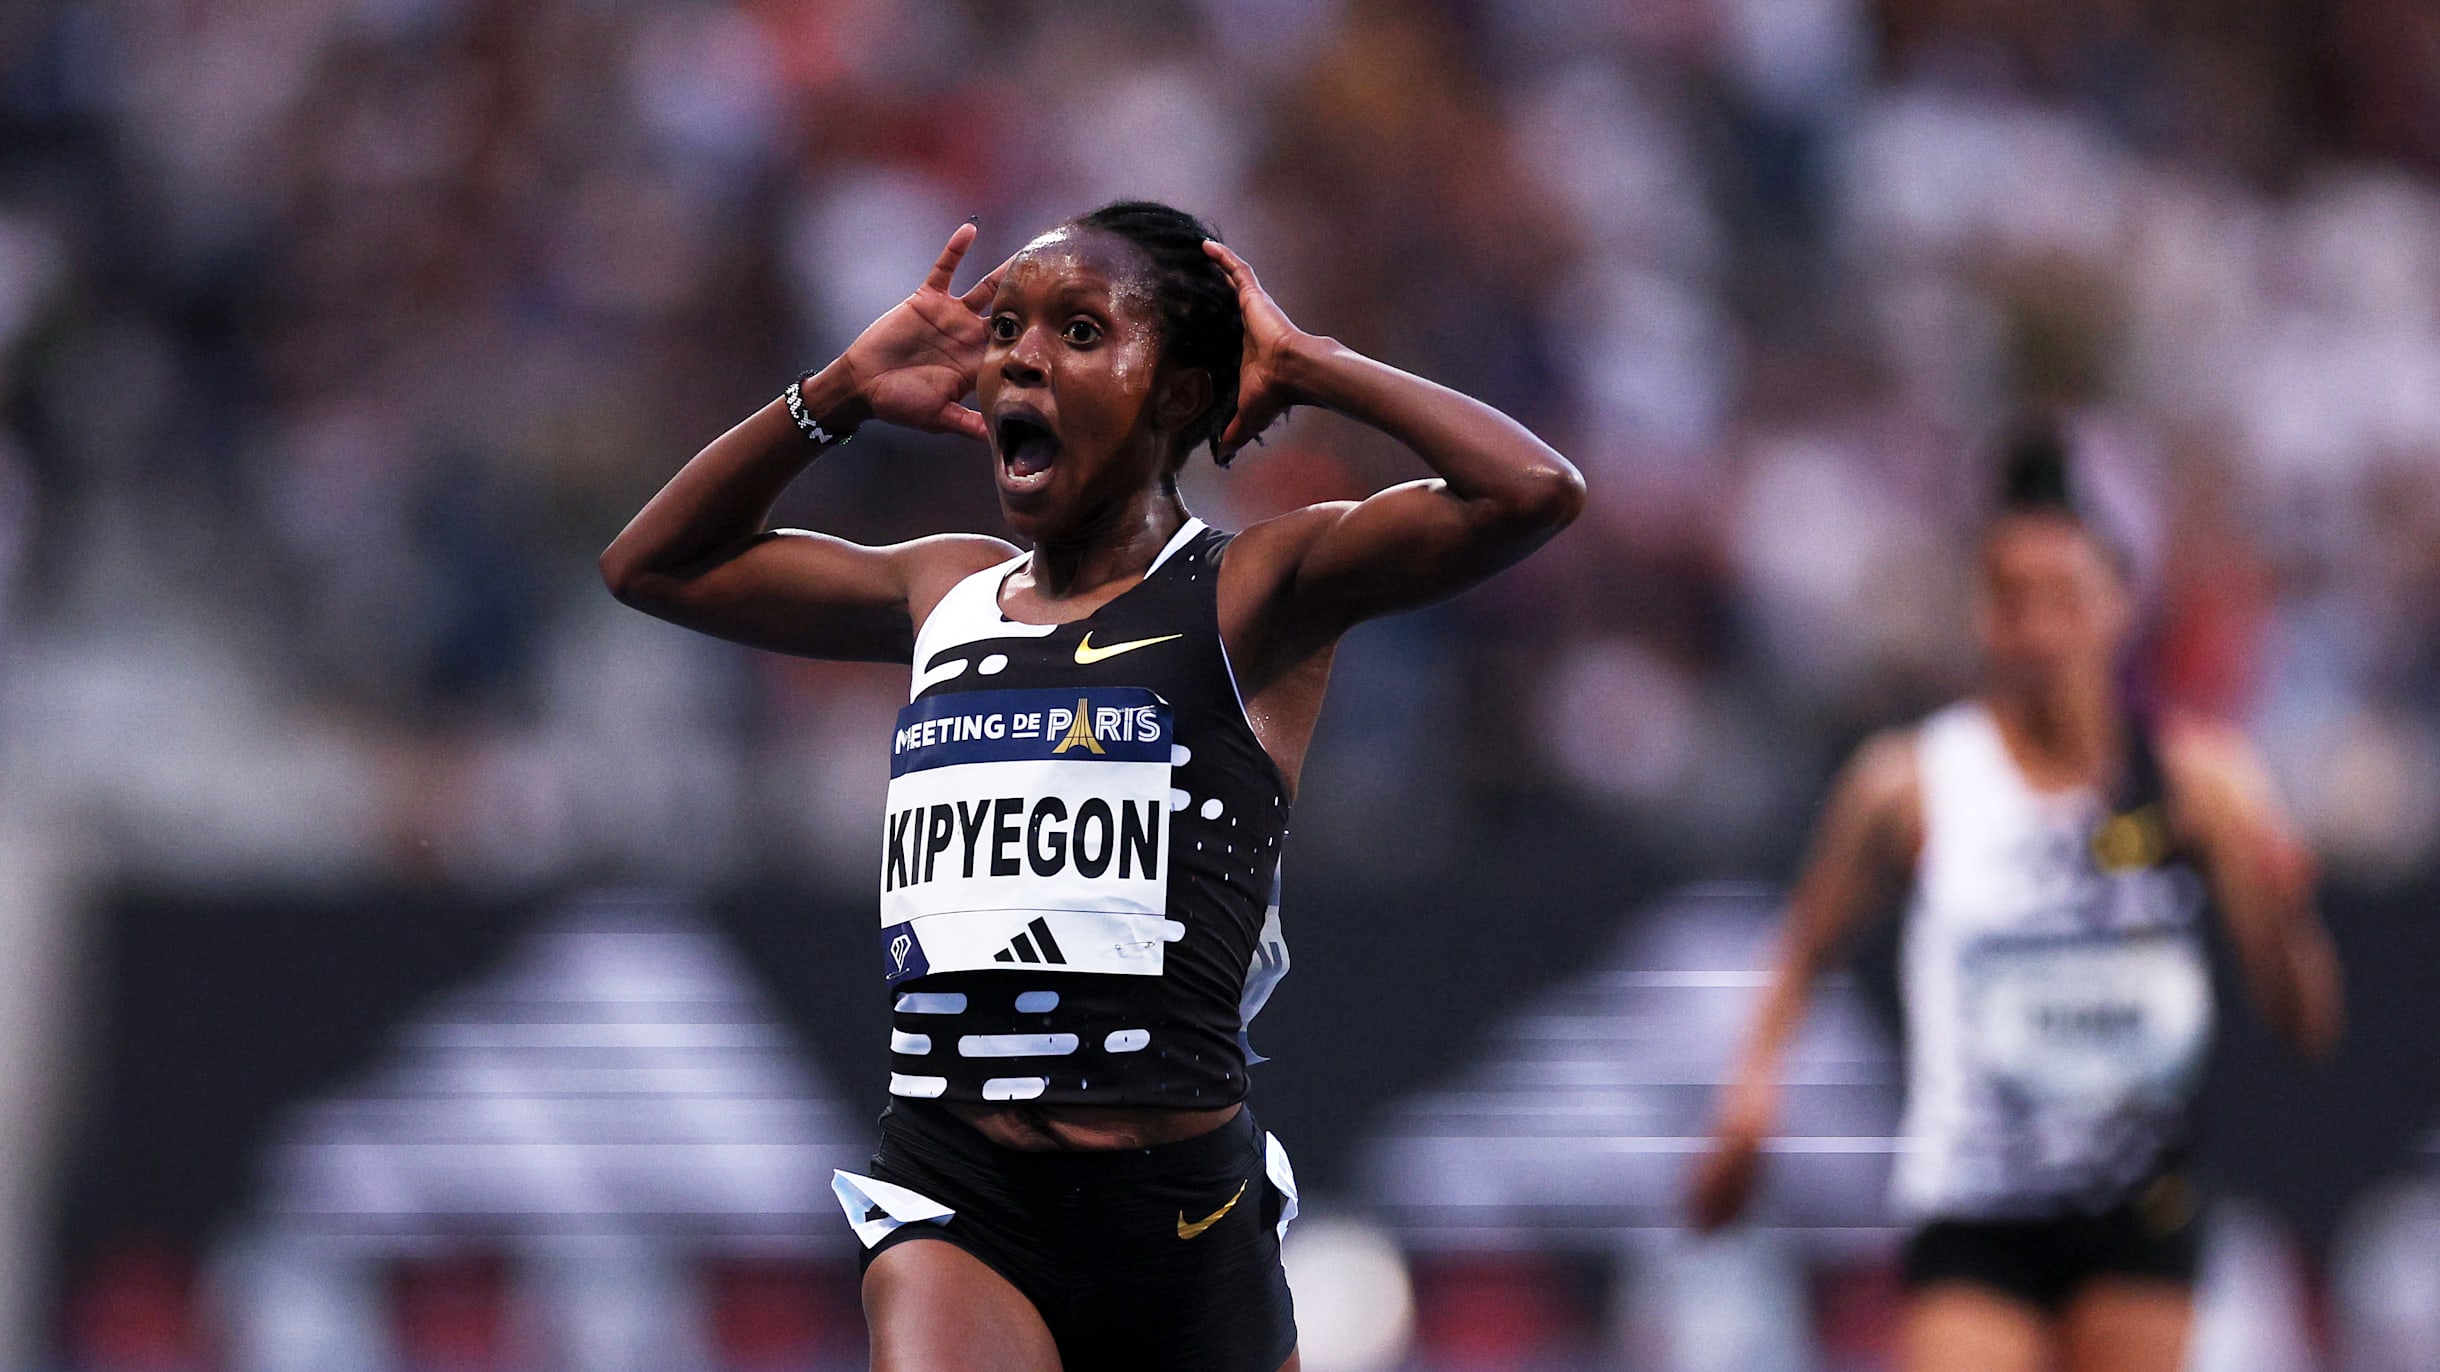 2023 Diamond League season Full list of disciplines and results for each World Athletics track and field top tier event